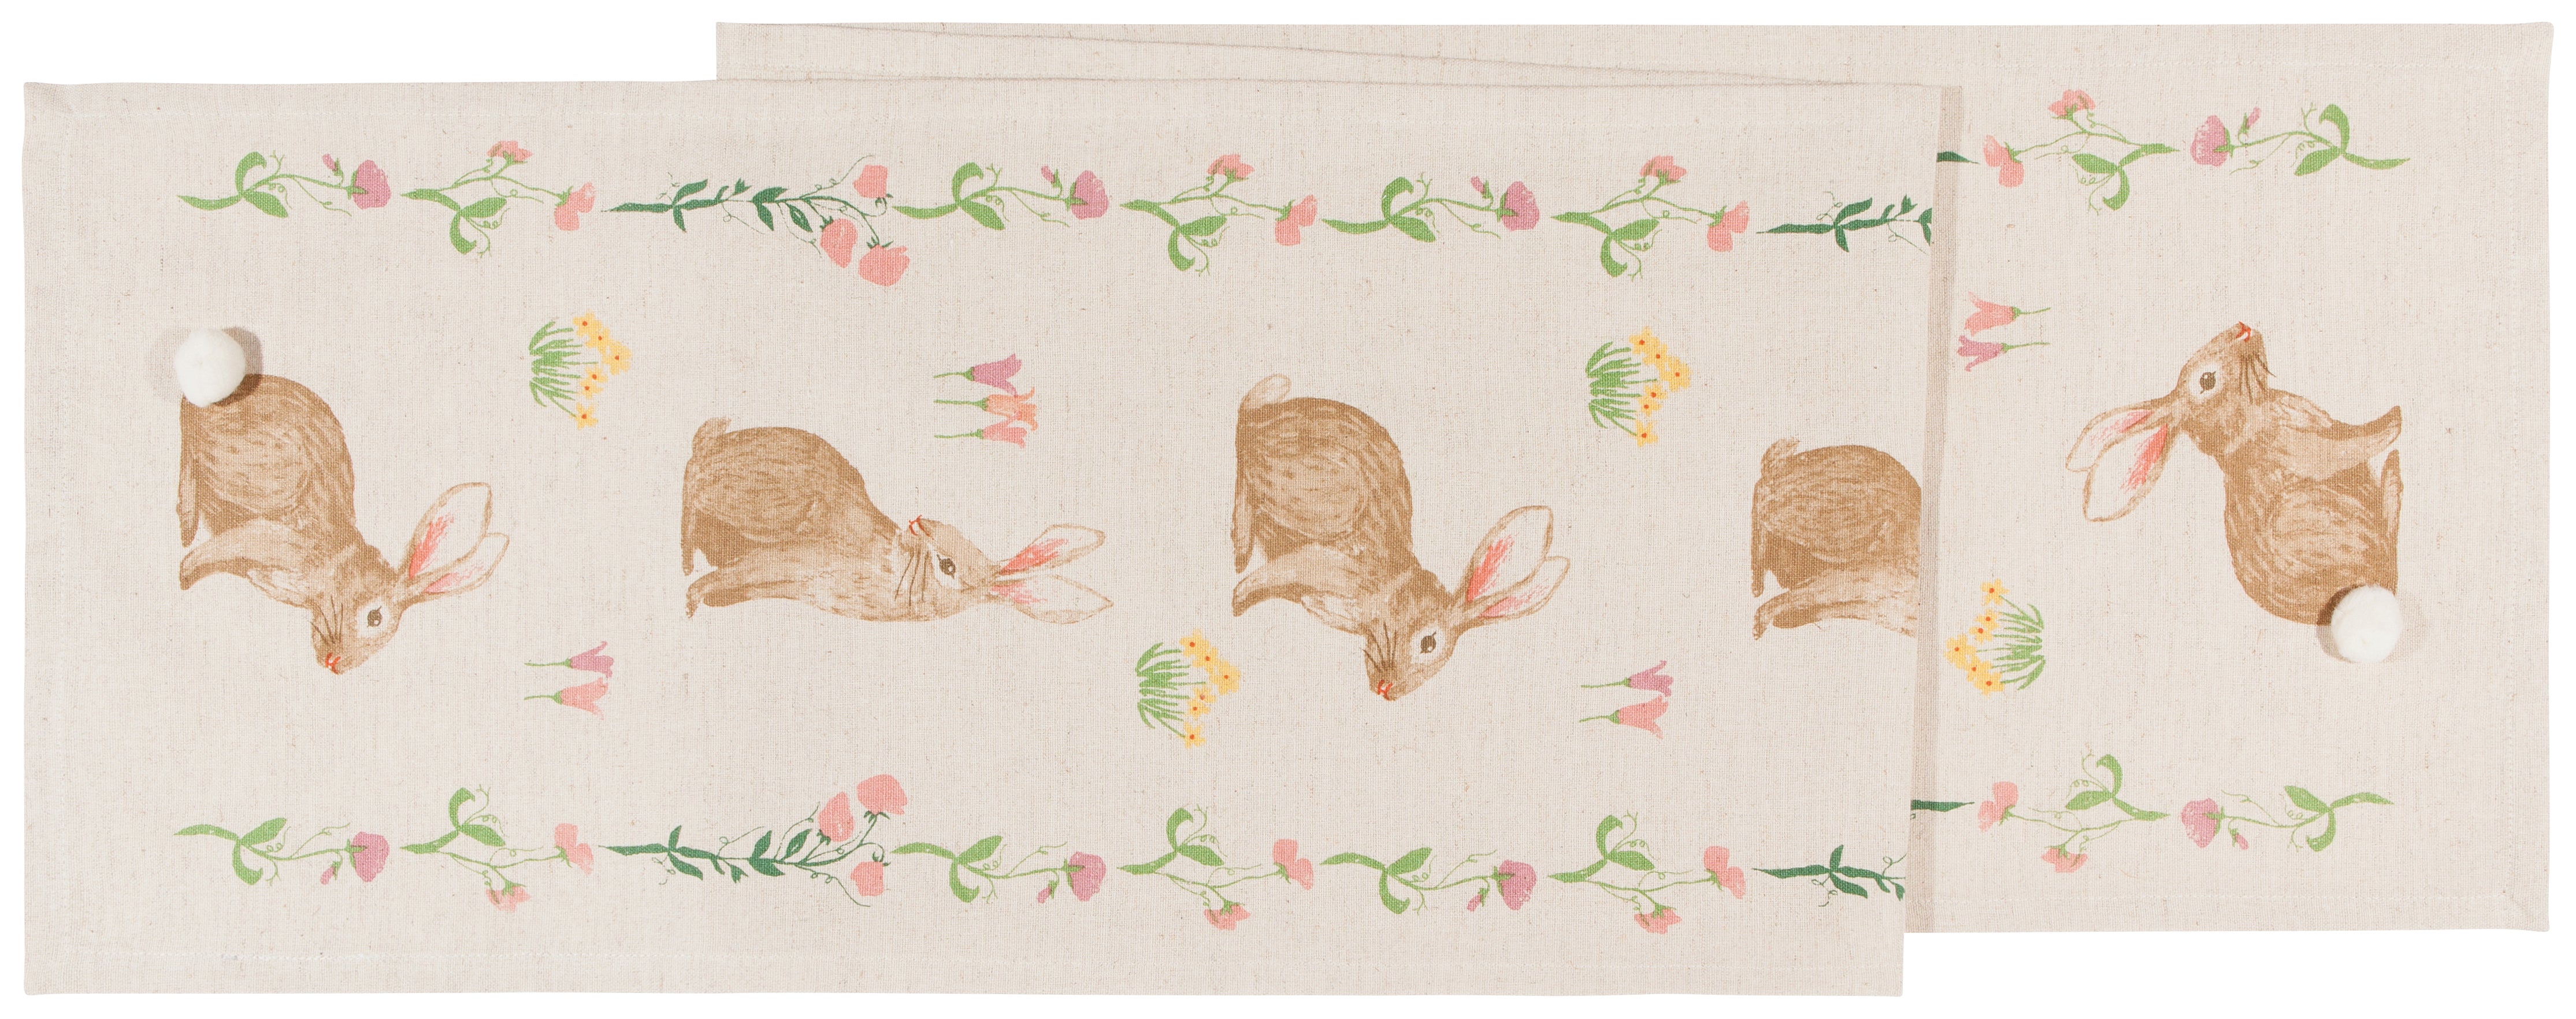 semi folded off-white table runner  with a vintage design that includes a border of light pink flowers, light brown bunnies, and yellow/pink flowers around it.